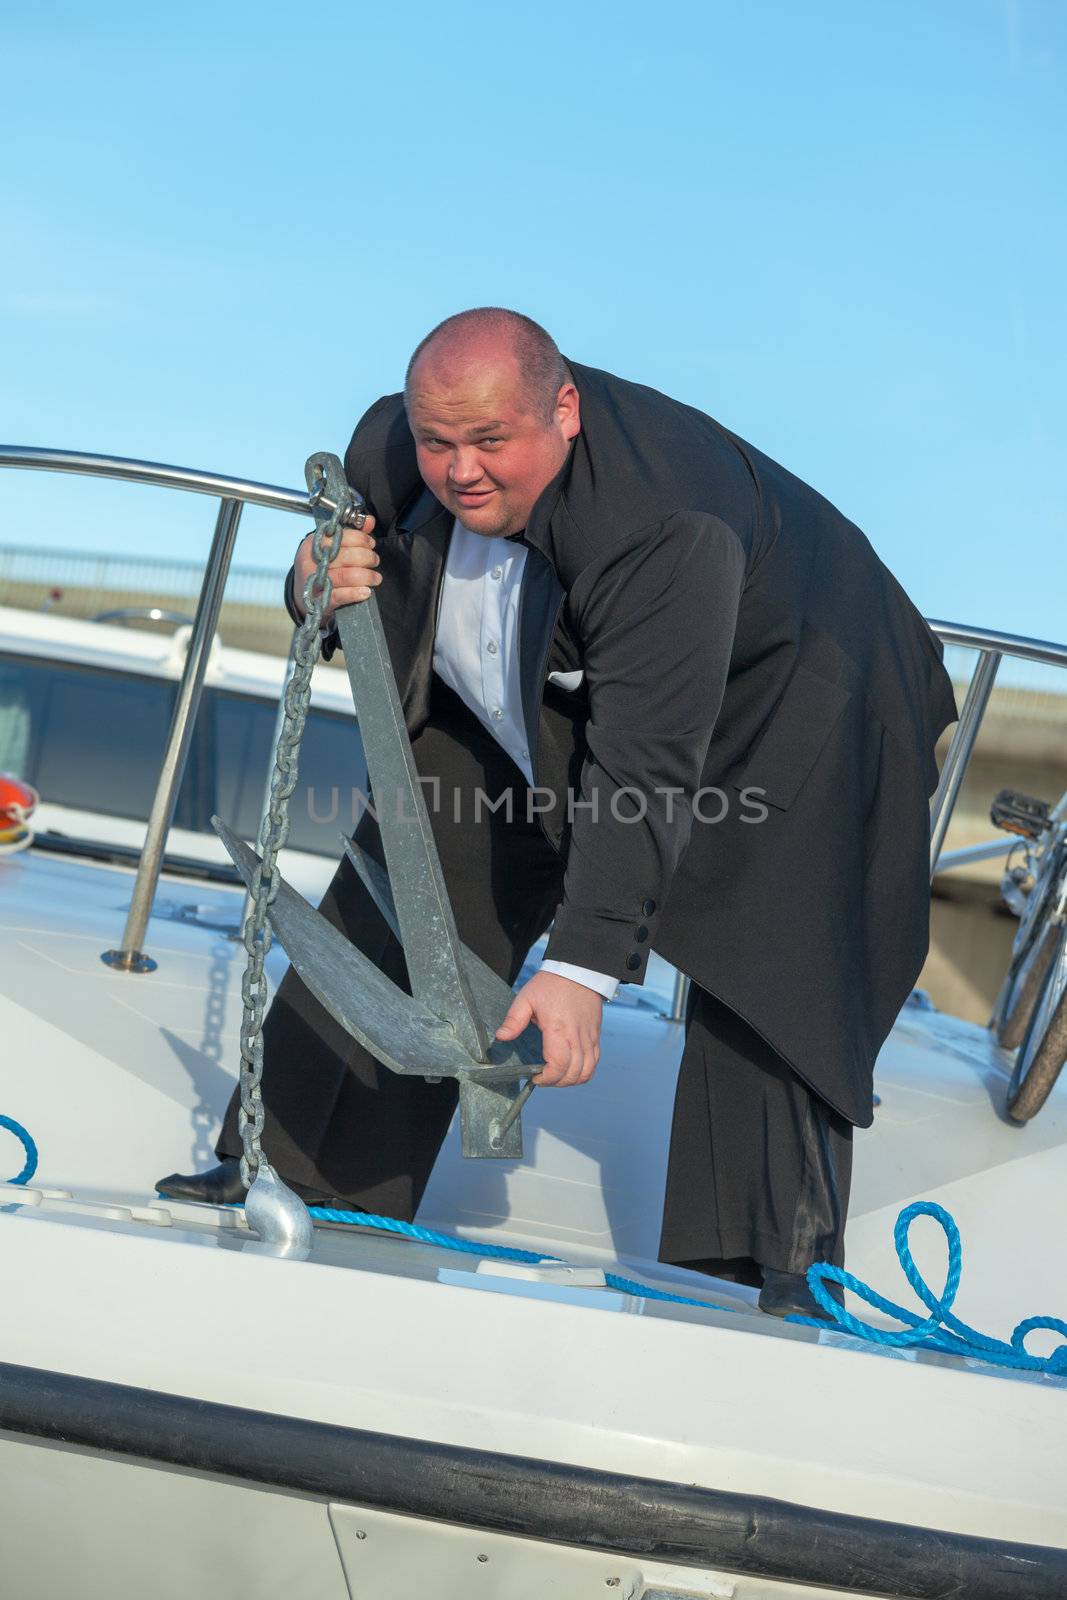 Overweight man standing on the deck of a luxury pleasure boat wearing a suit and lifting an anchor, conceptual of wealth